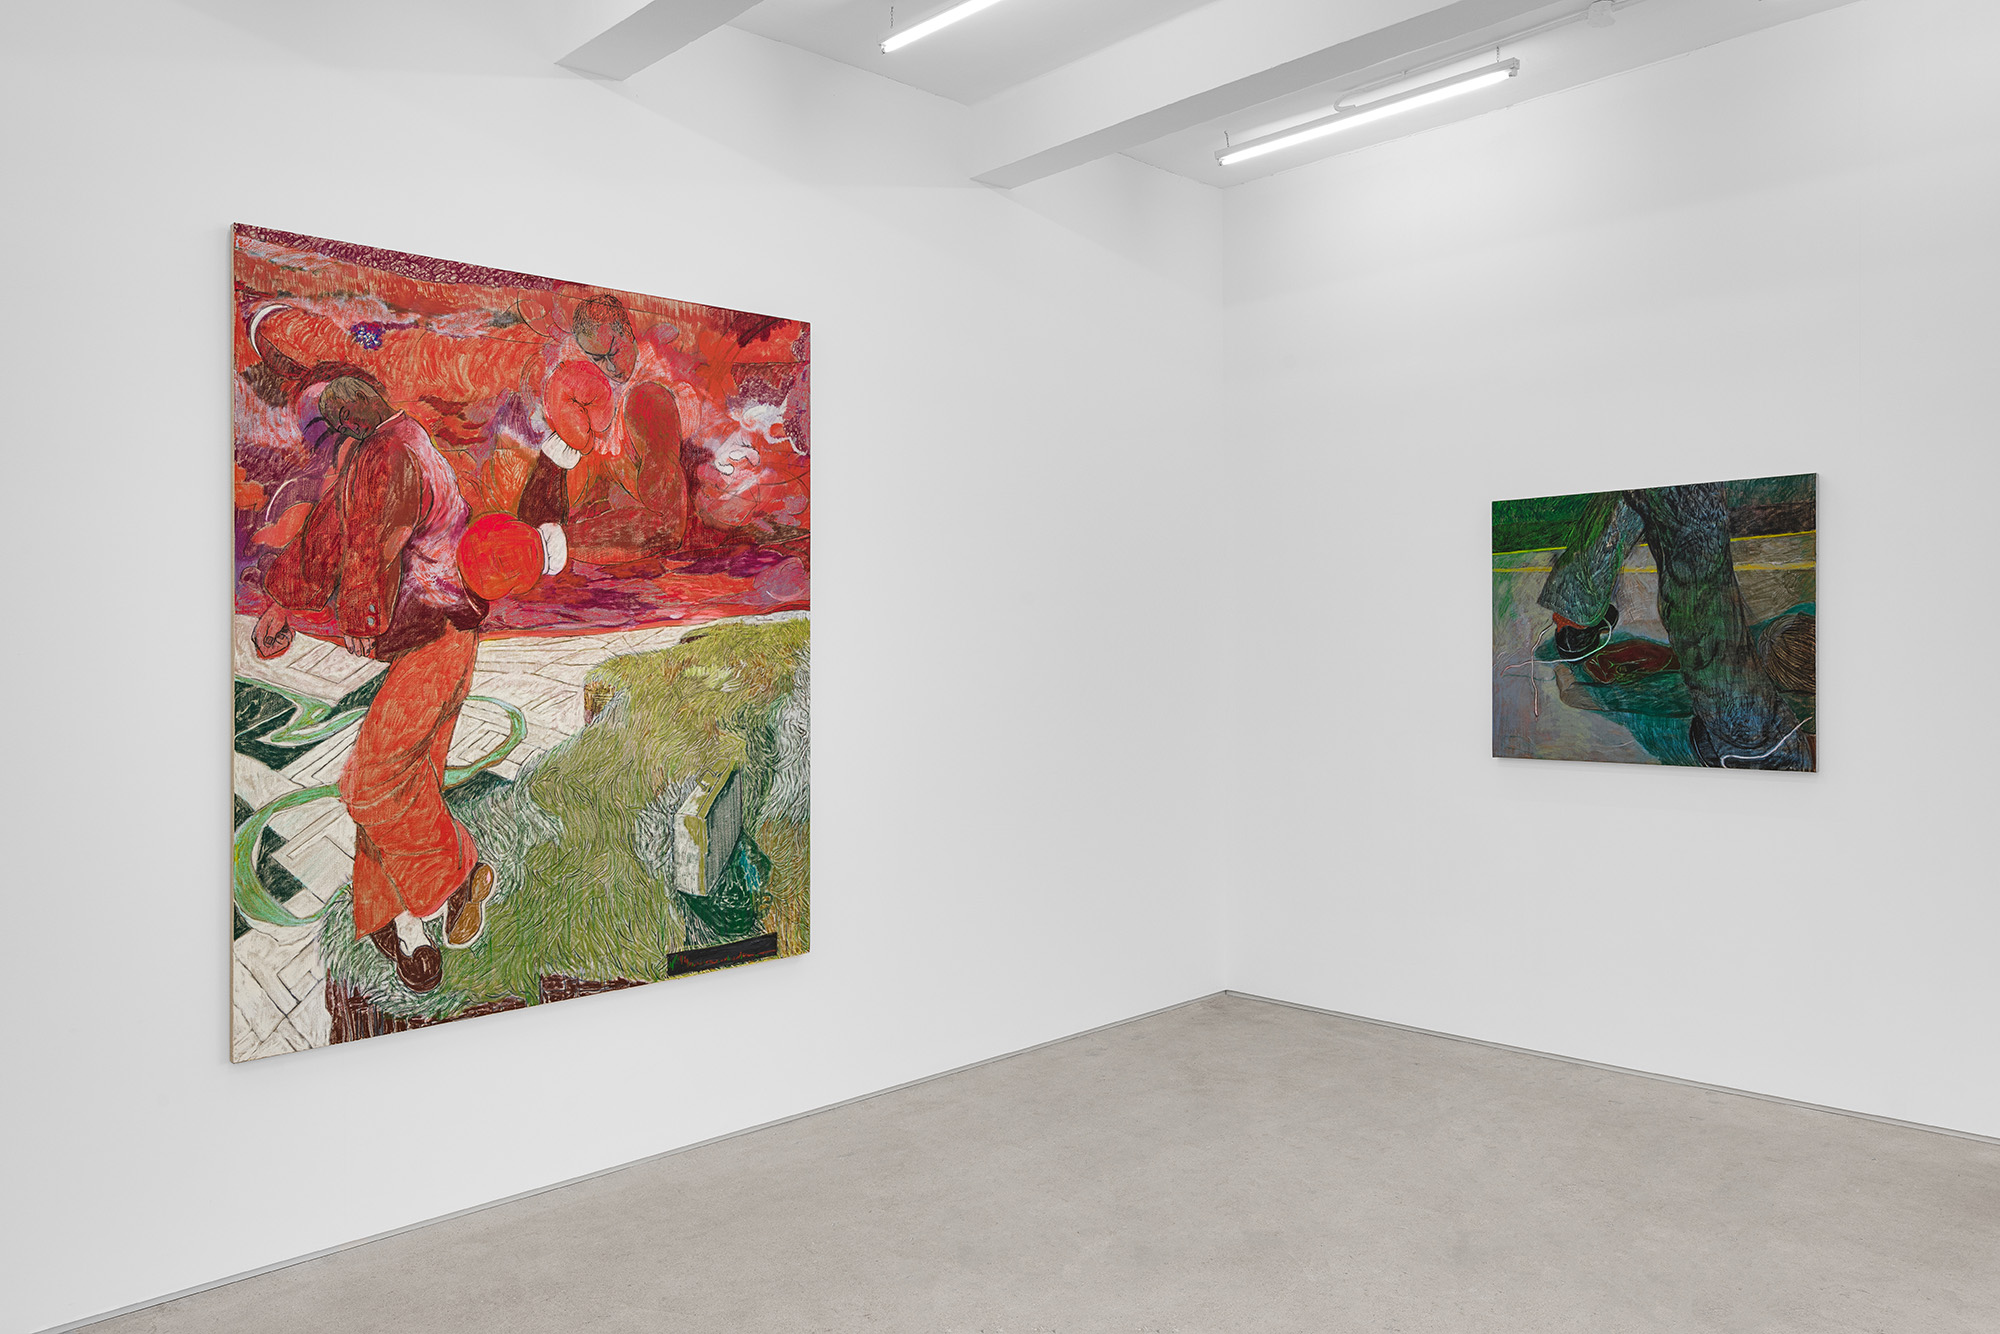 Installation view of group exhibition, Vacation II, at Gallery Vacancy, featuring works by Henry Curchod.